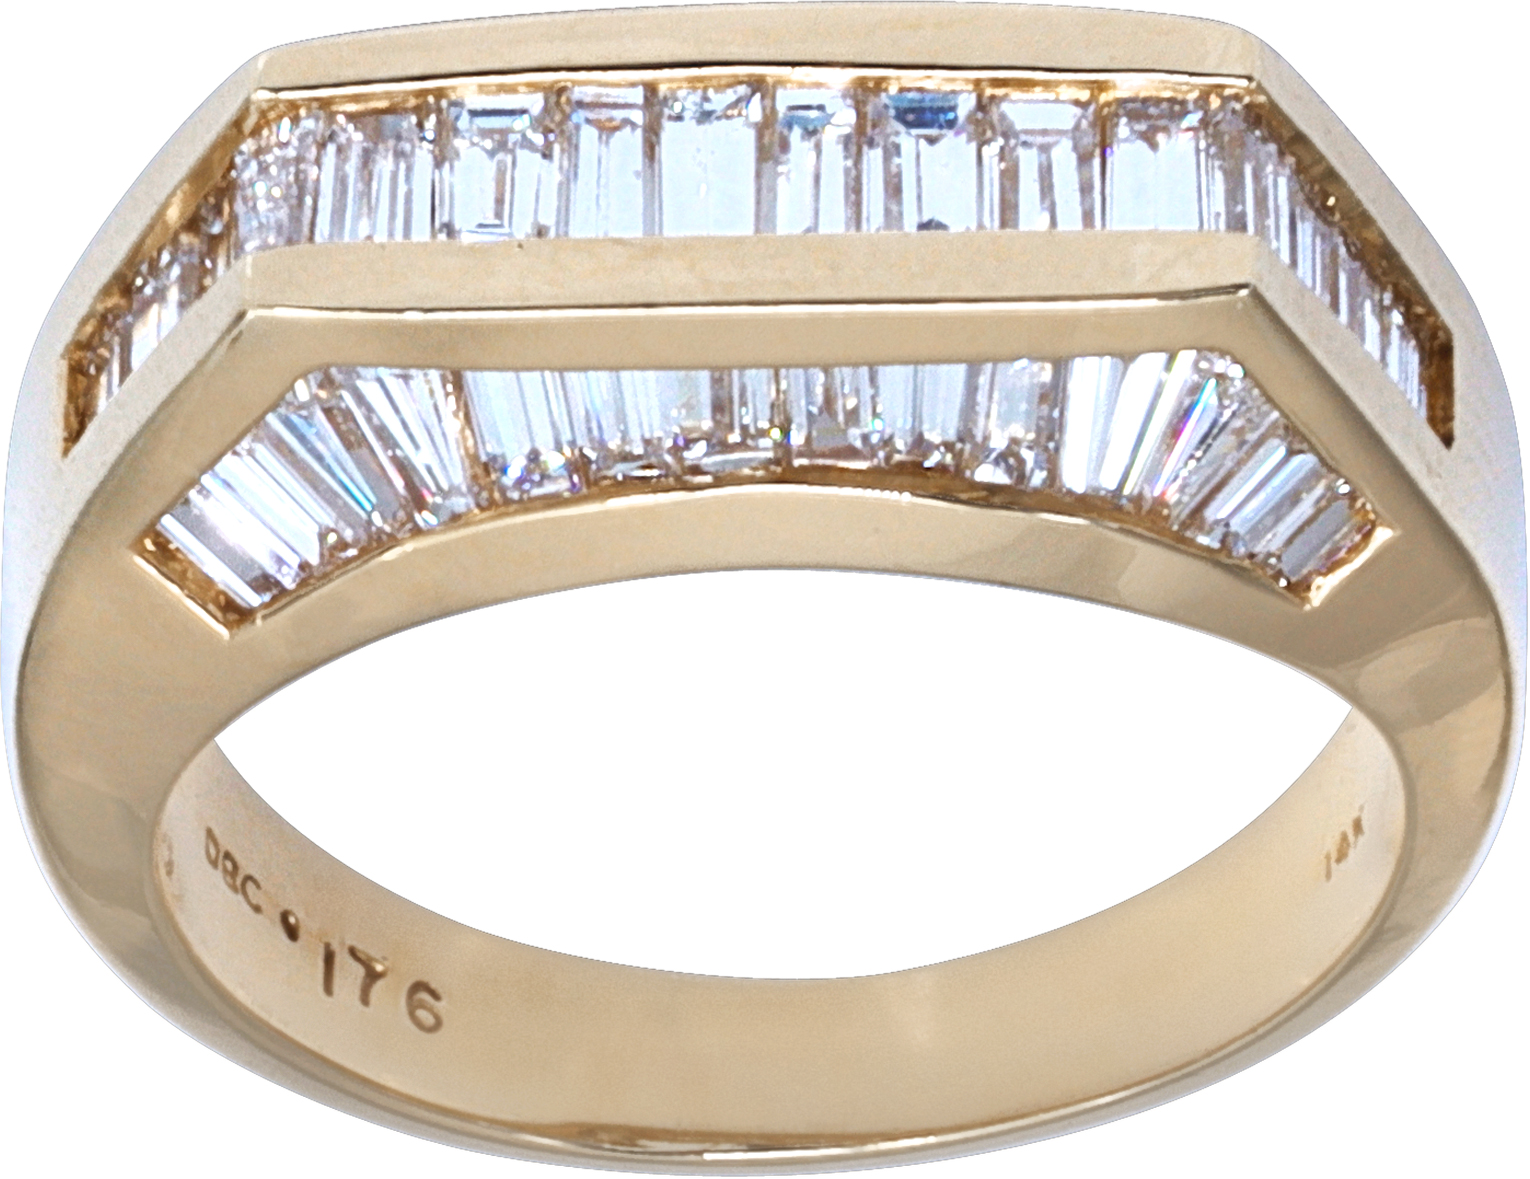 Diamond ring in 14k yellow gold with baguette cut diamonds